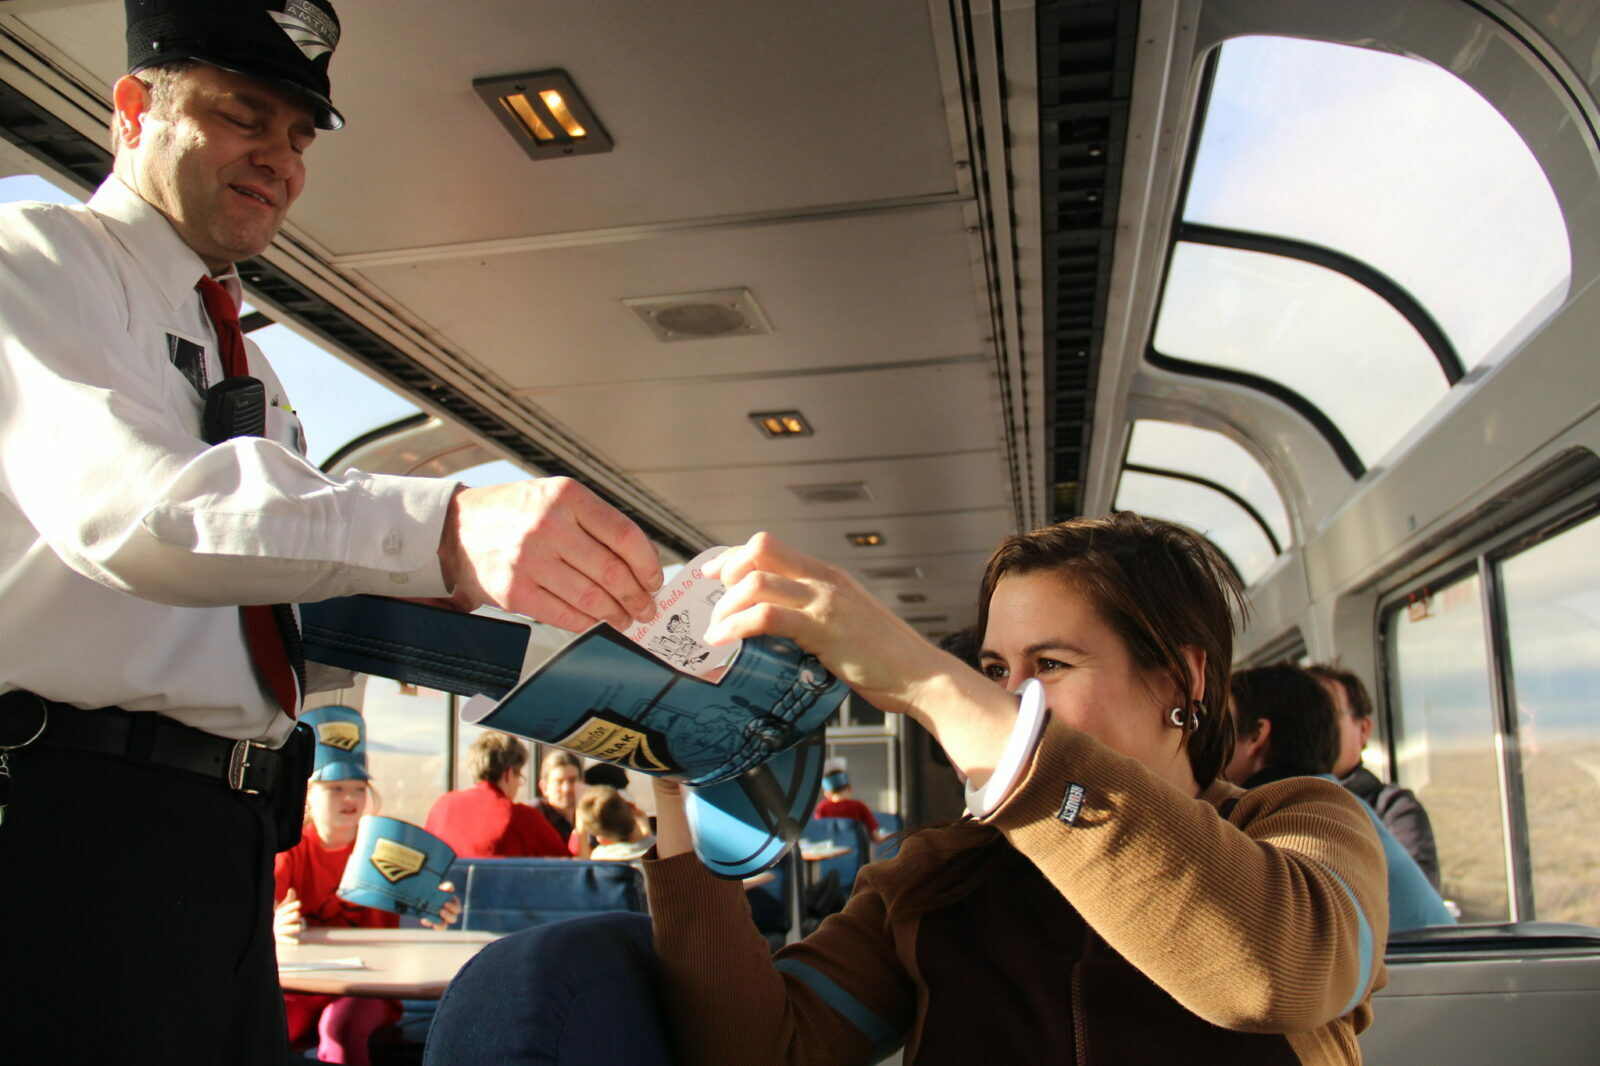 An Amtrak employee interacts with passengers on the train